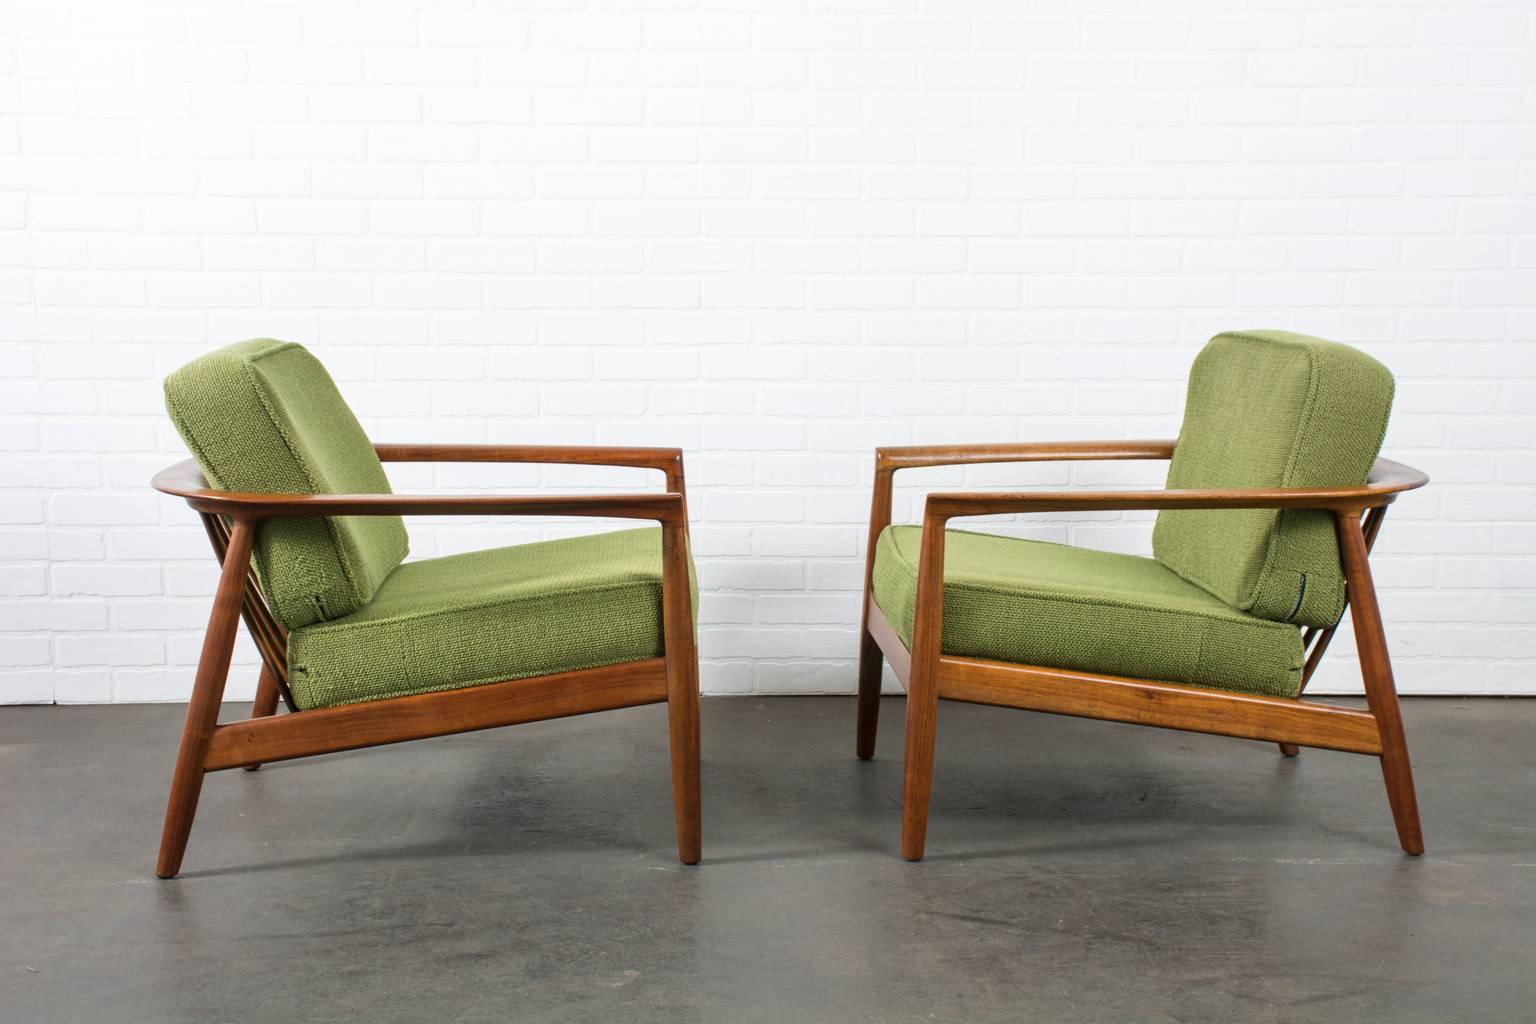 This pair of vintage Mid-Century walnut lounge chairs were designed by Folke Ohlsson for Dux in the 1960's. This particular model is the 72-C 